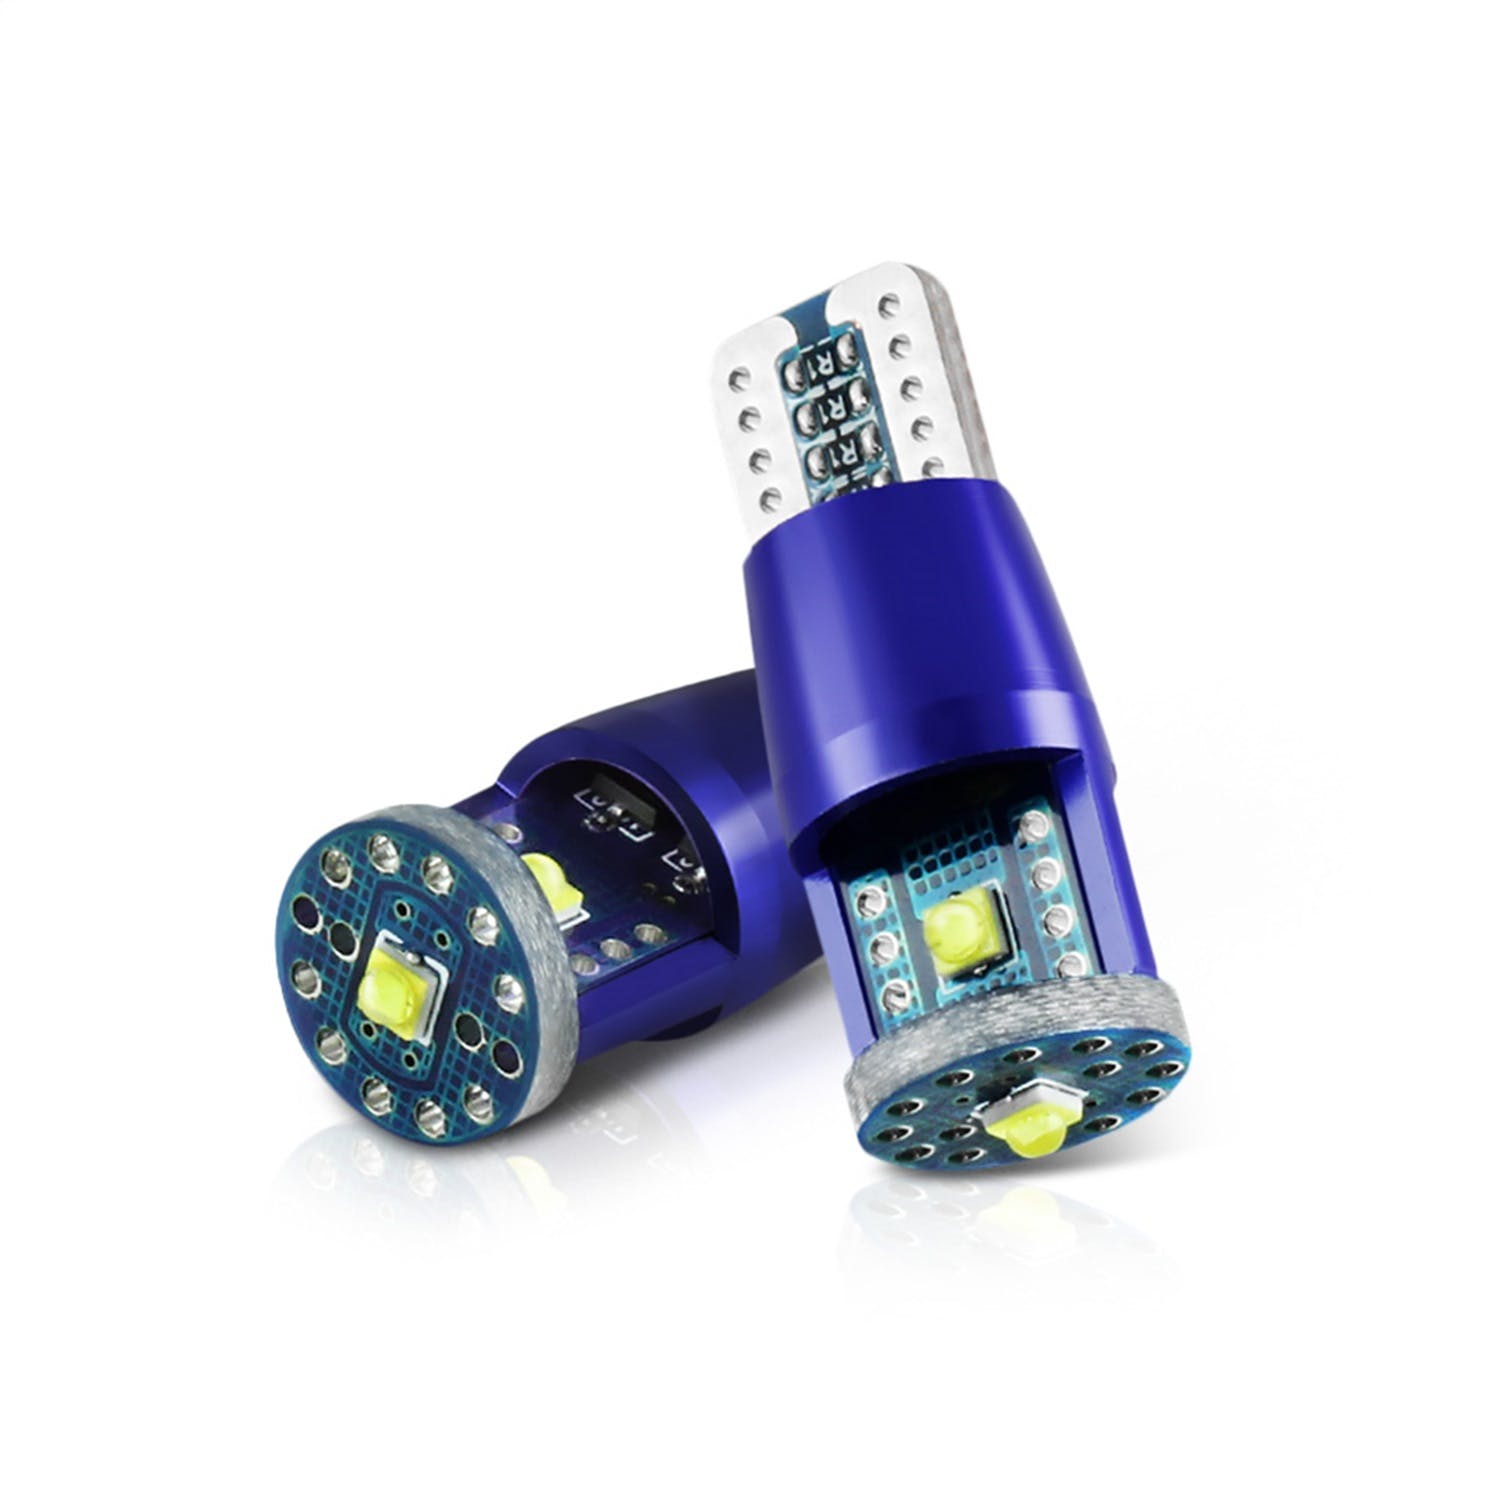 XTUNE POWER 9044847 Crisp and Radiant 3 x CREE Chip Machine Soldered Into Each Bulb White Color White 5500K 1 Pair T10 194